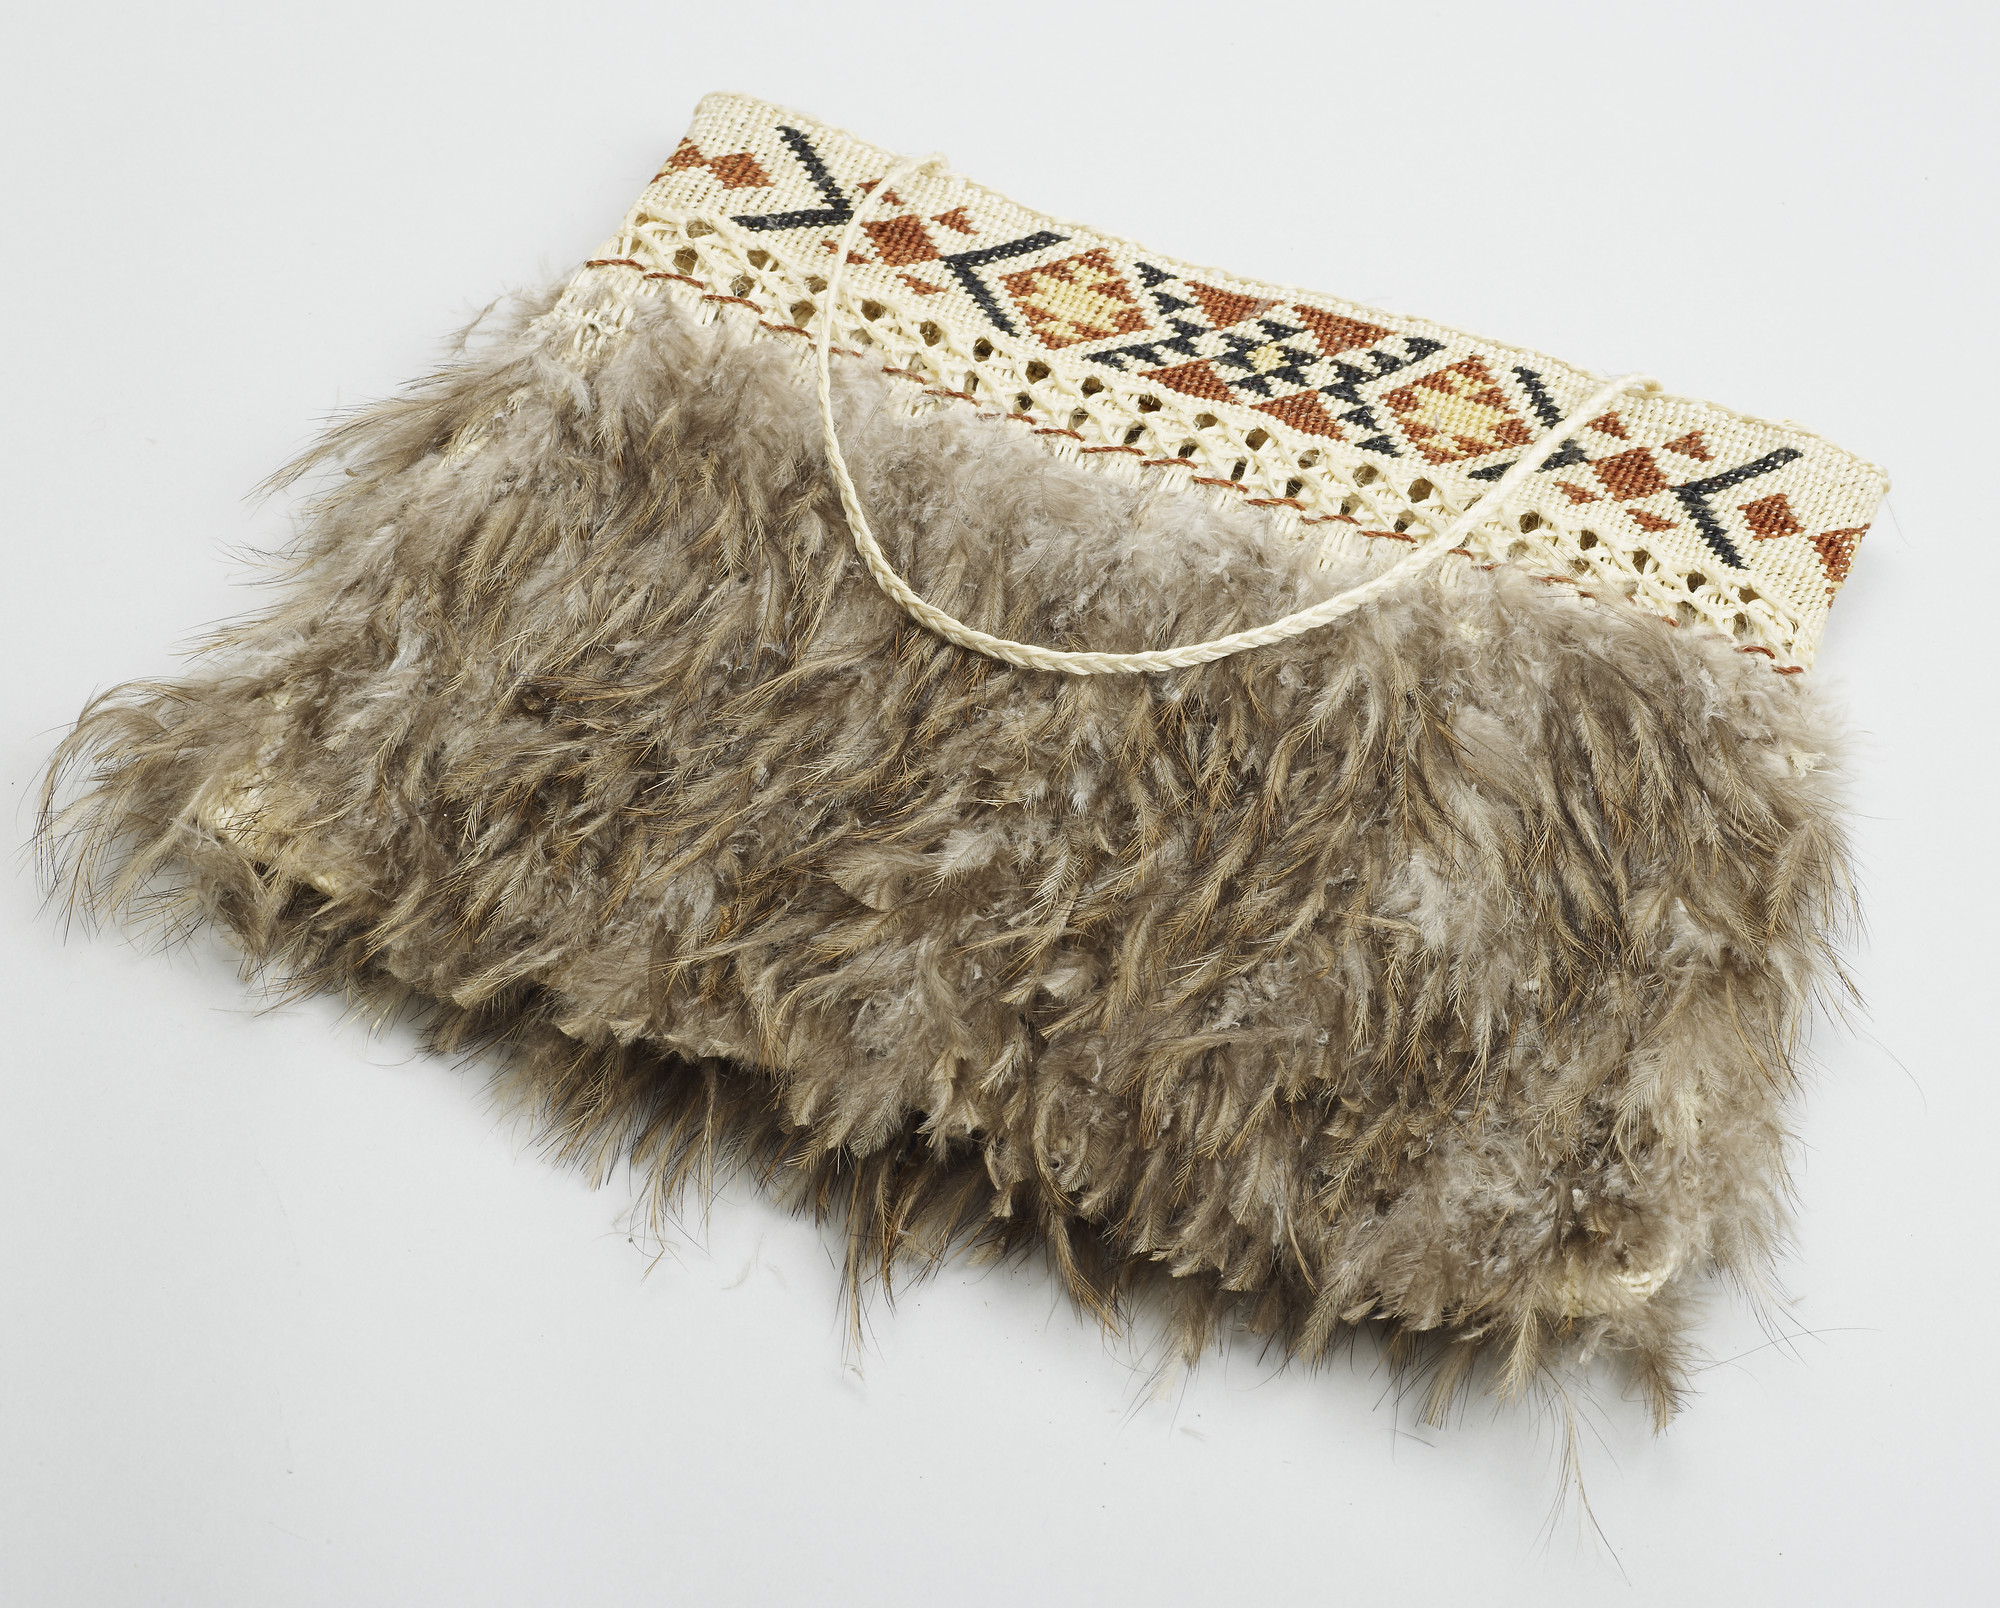 A Maori bag made of flax and kiwi feathers. The kiwi bird holds a special significance for the Maori - it is symbolic of elder brothers and sisters, representing their protective spirits.


During a visit to New Zealand in October 1981, the Te Atiawa p